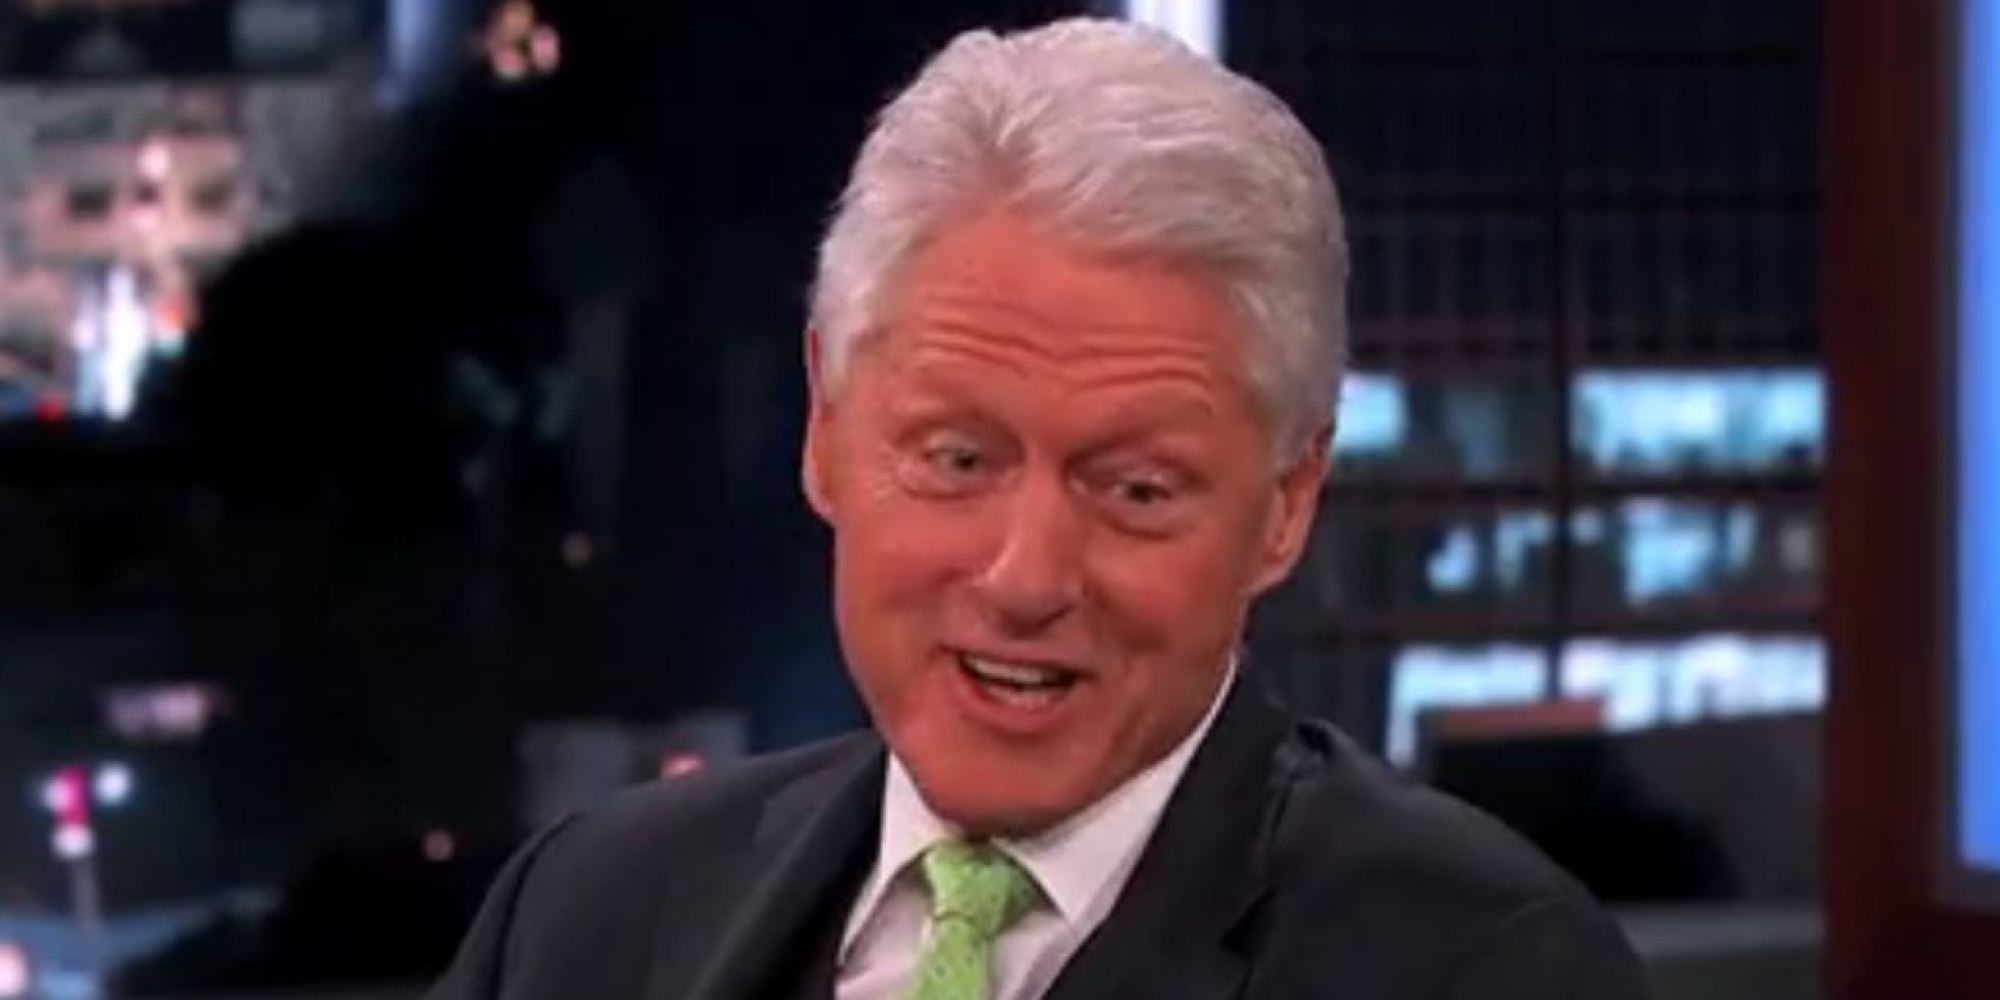 Bill clinton comments on rob ford #6